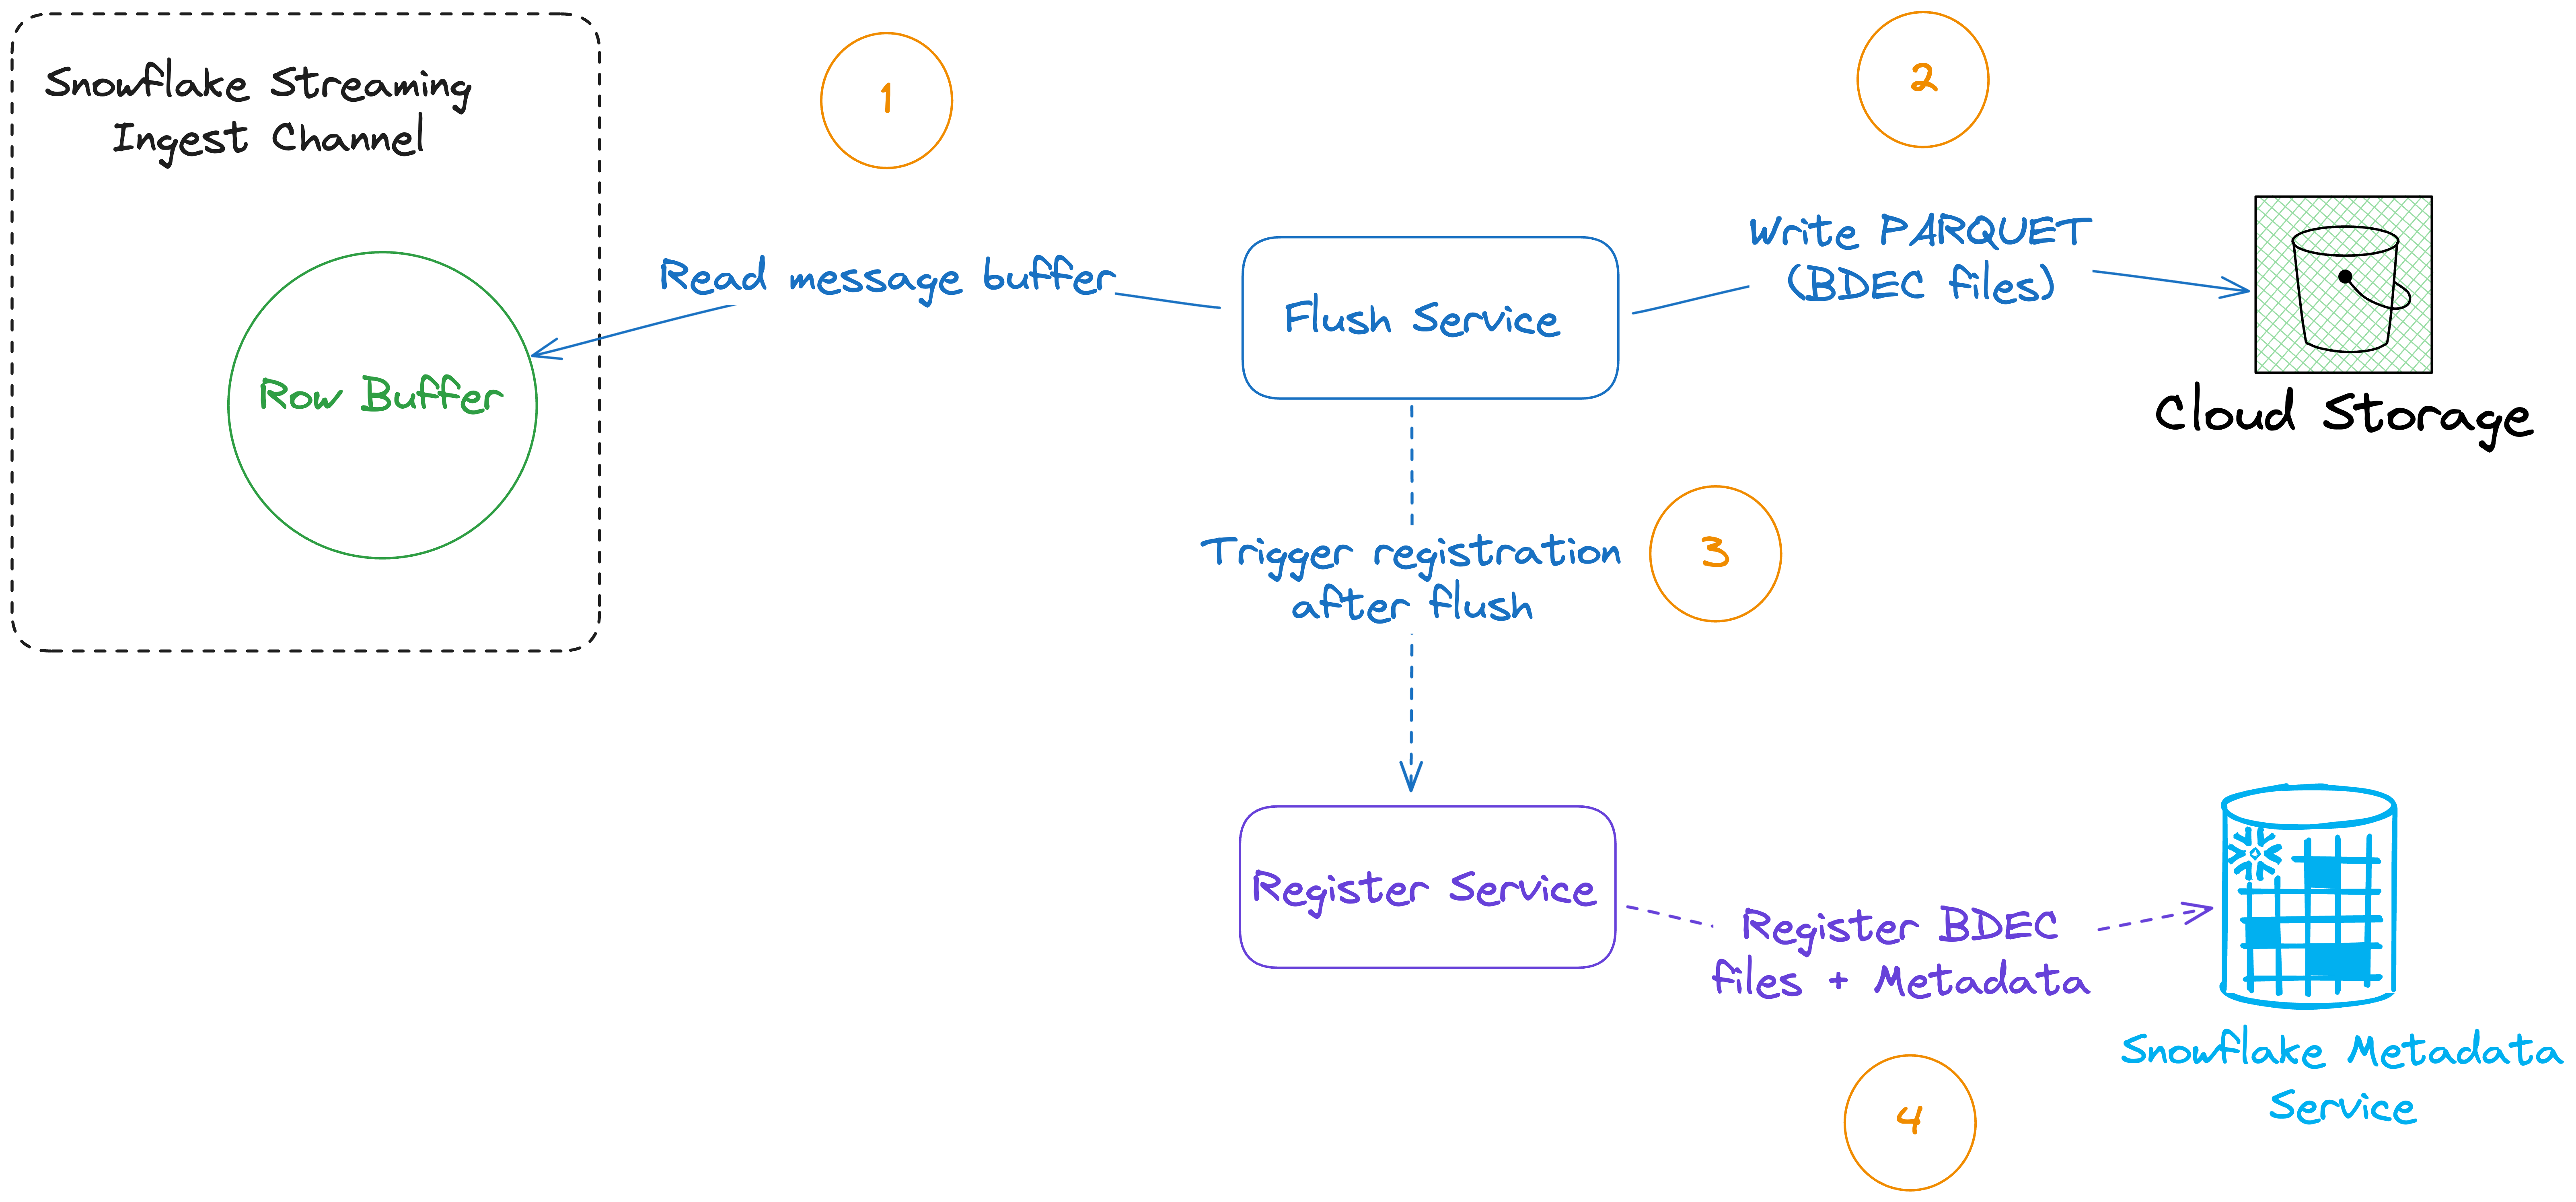 Writing data from buffers to cloud storage and registration